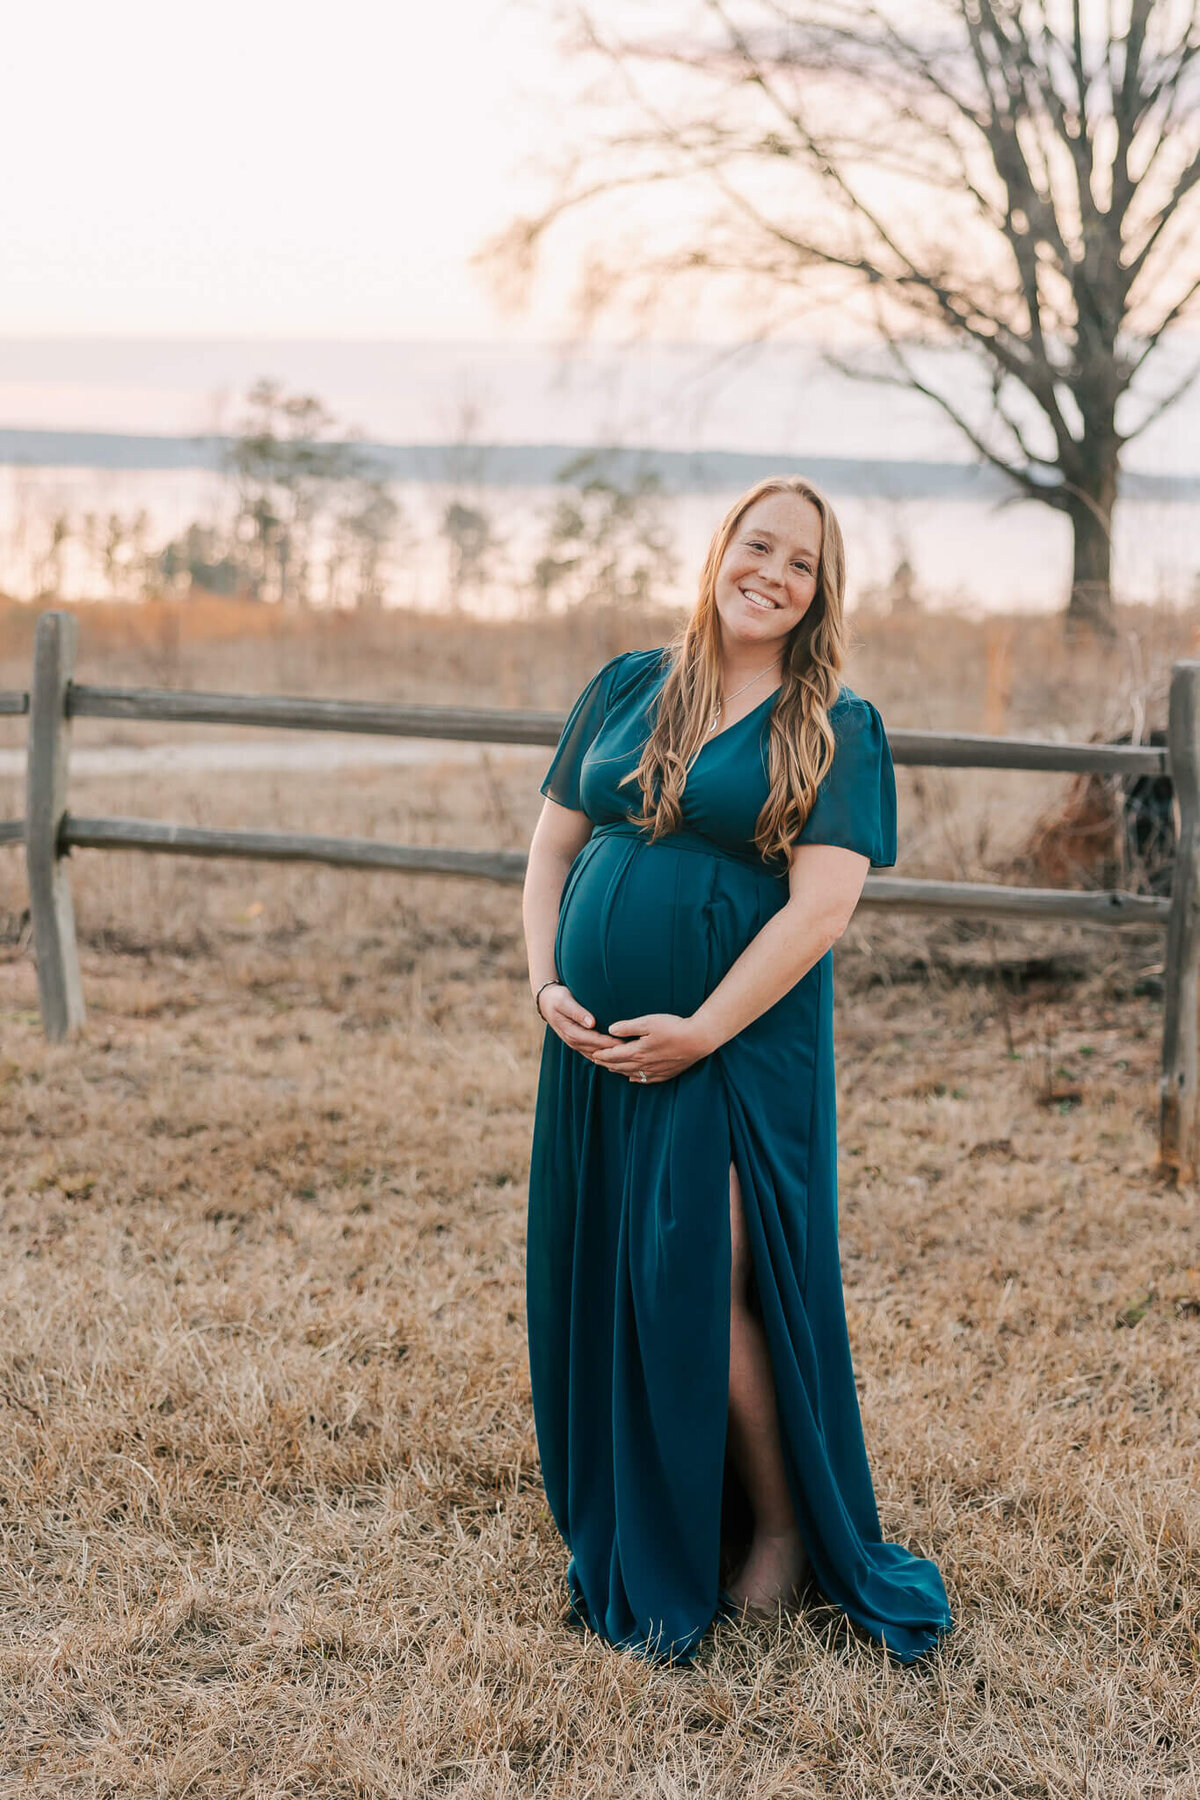 Augusta maternity photographer captured expecting mom as she walks through an open field.